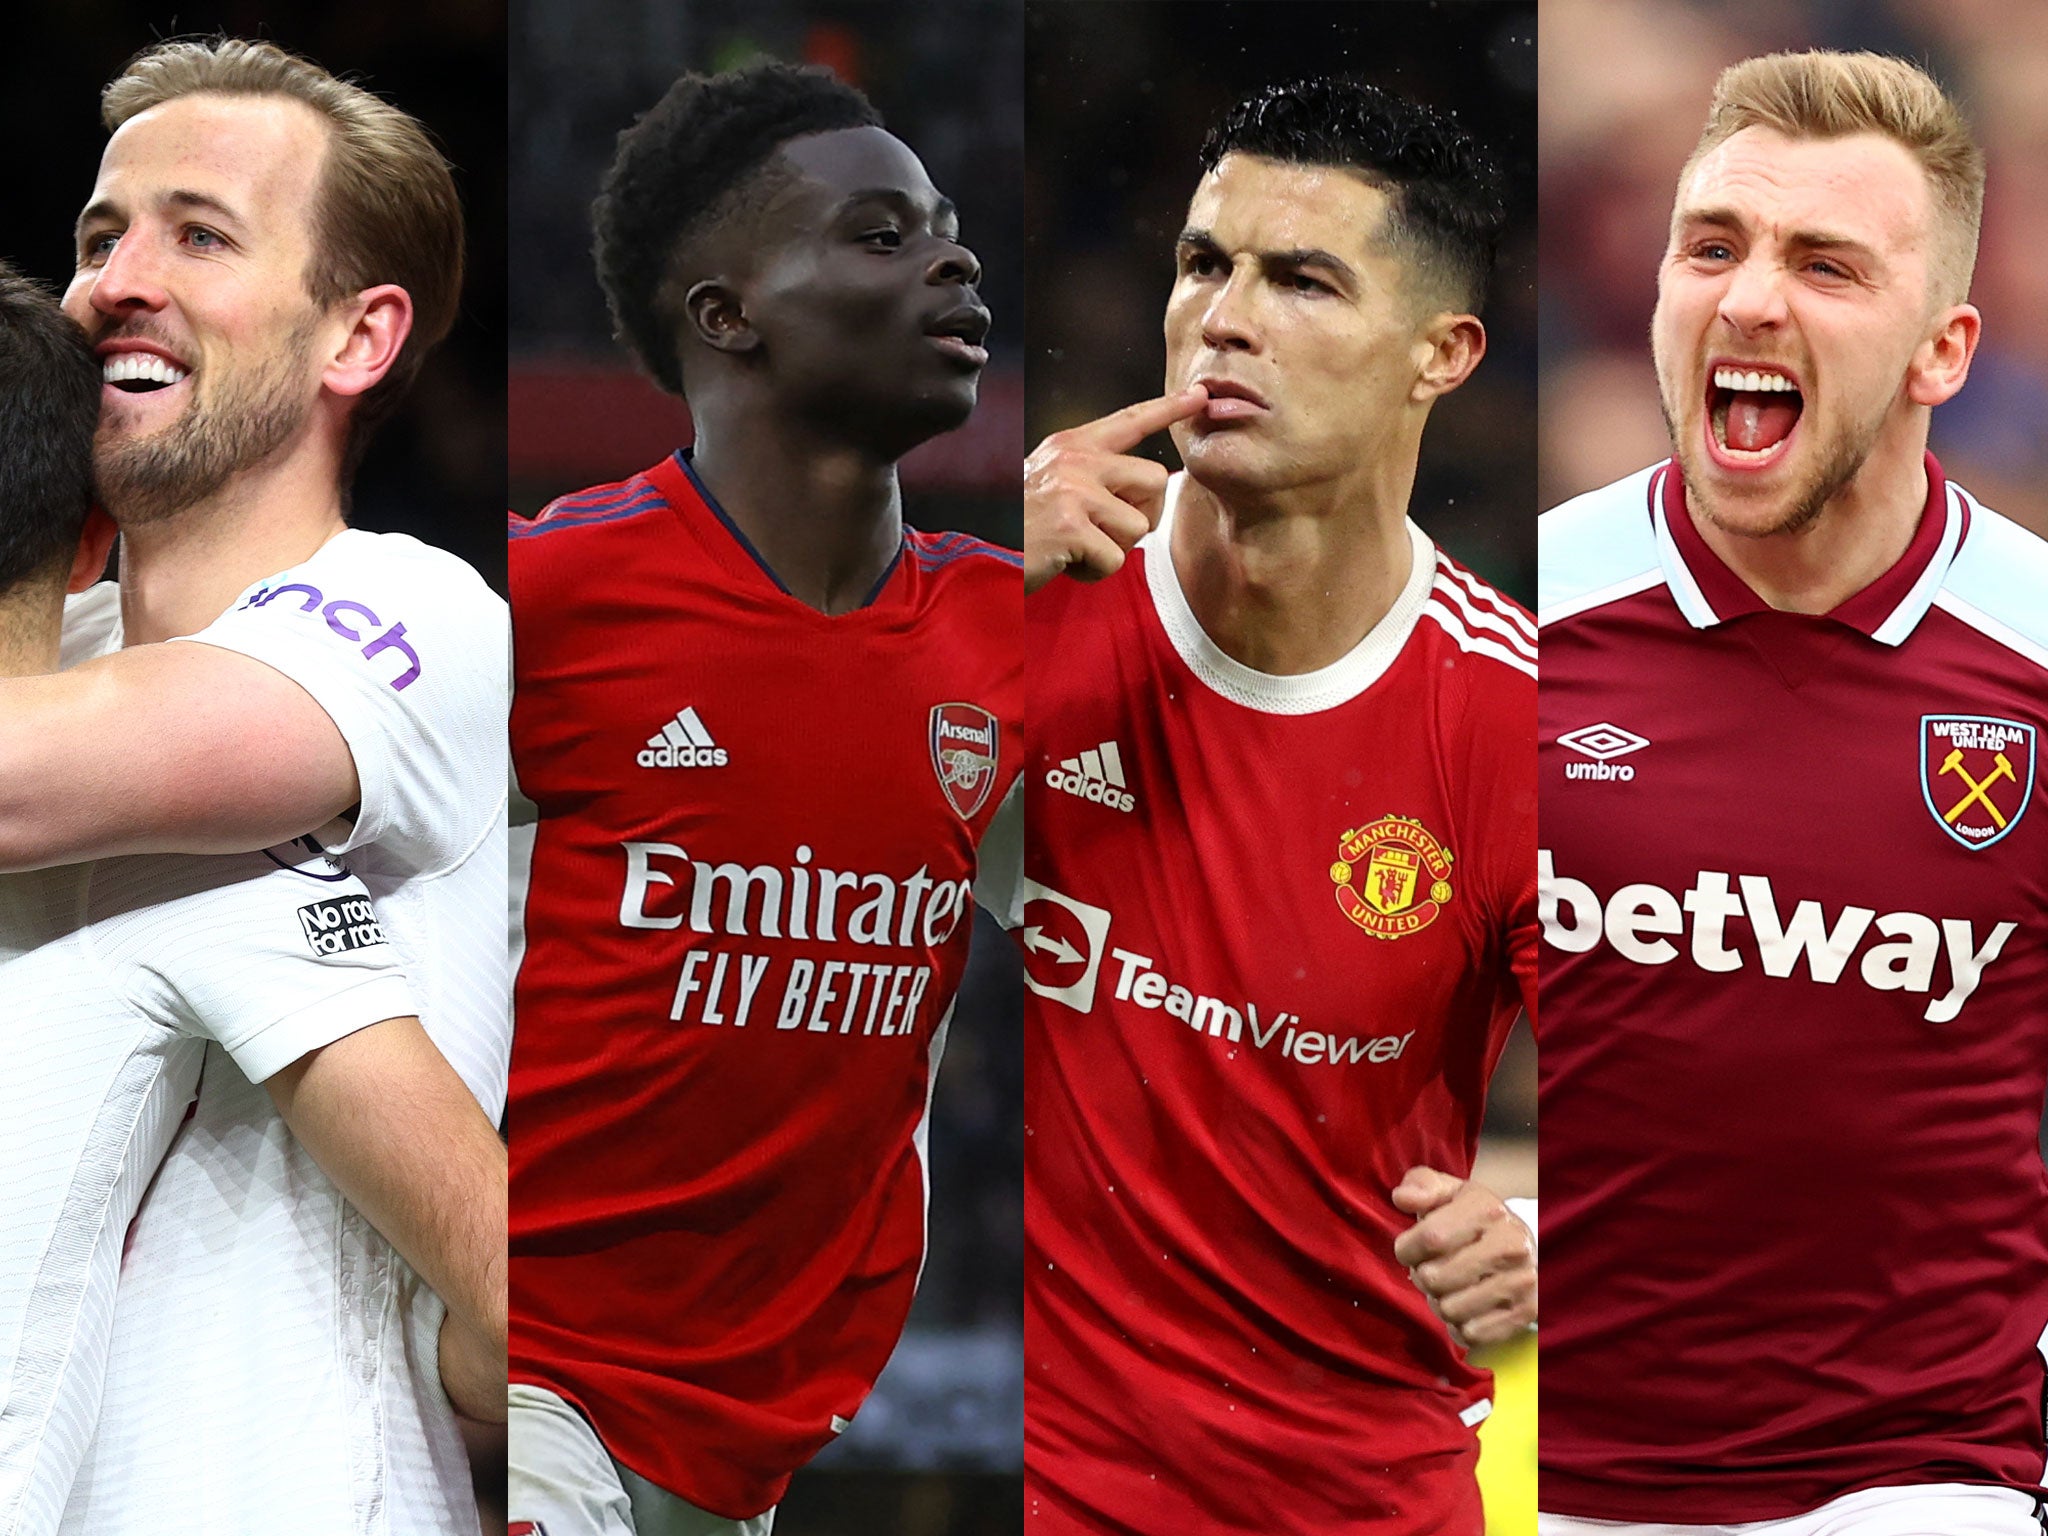 Tottenham, Arsenal, Manchester United and West Ham are battling for a top-four finish